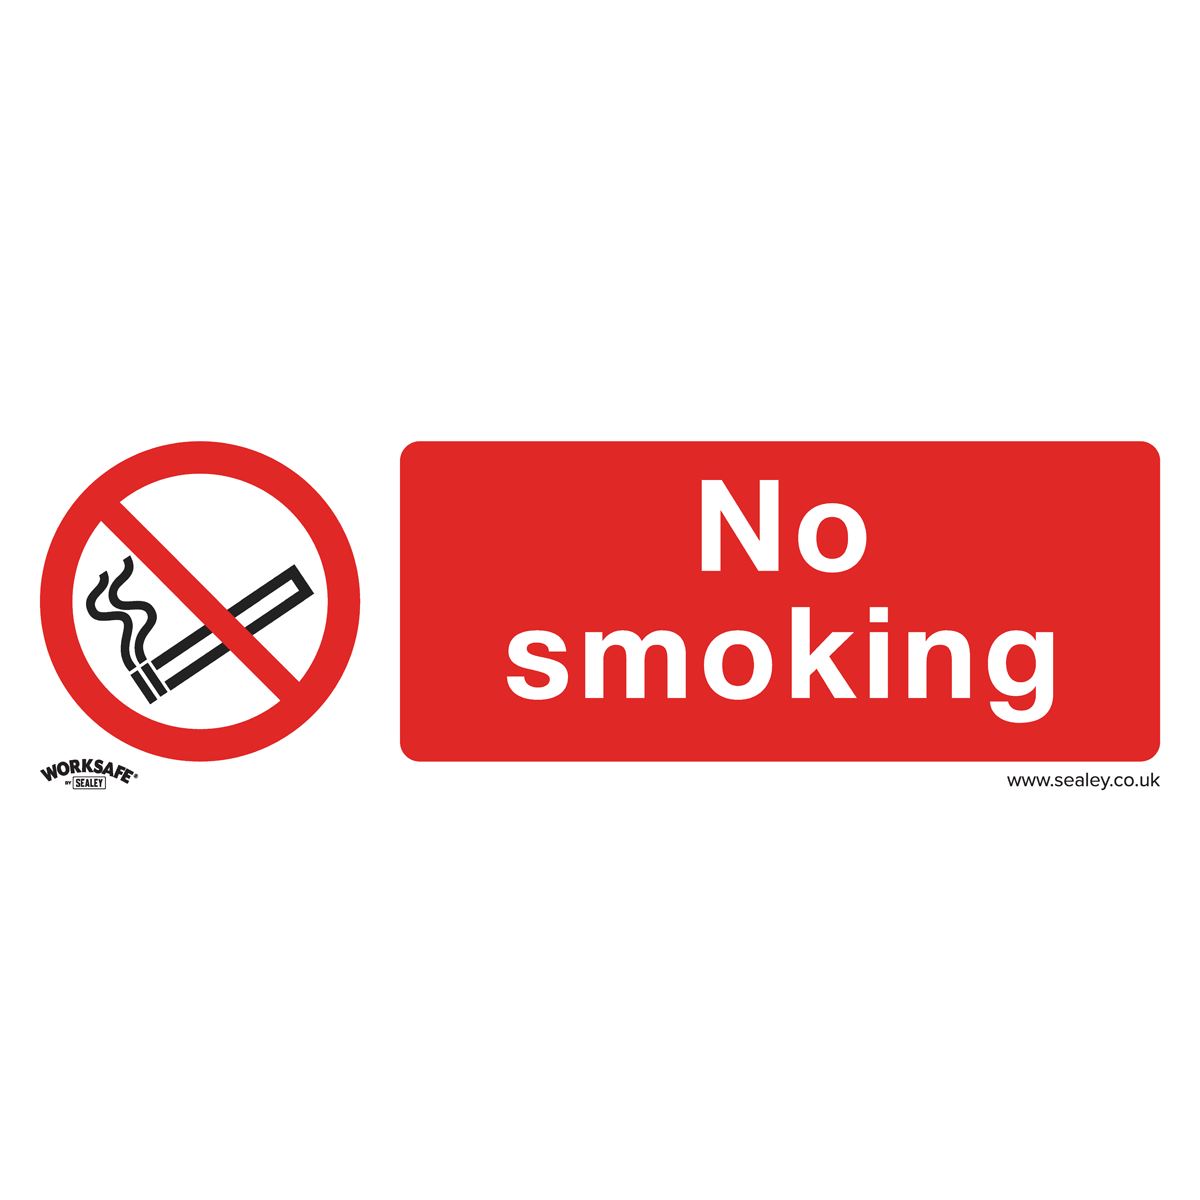 Worksafe by Sealey Prohibition Safety Sign - No Smoking - Self-Adhesive Vinyl - Pack of 10